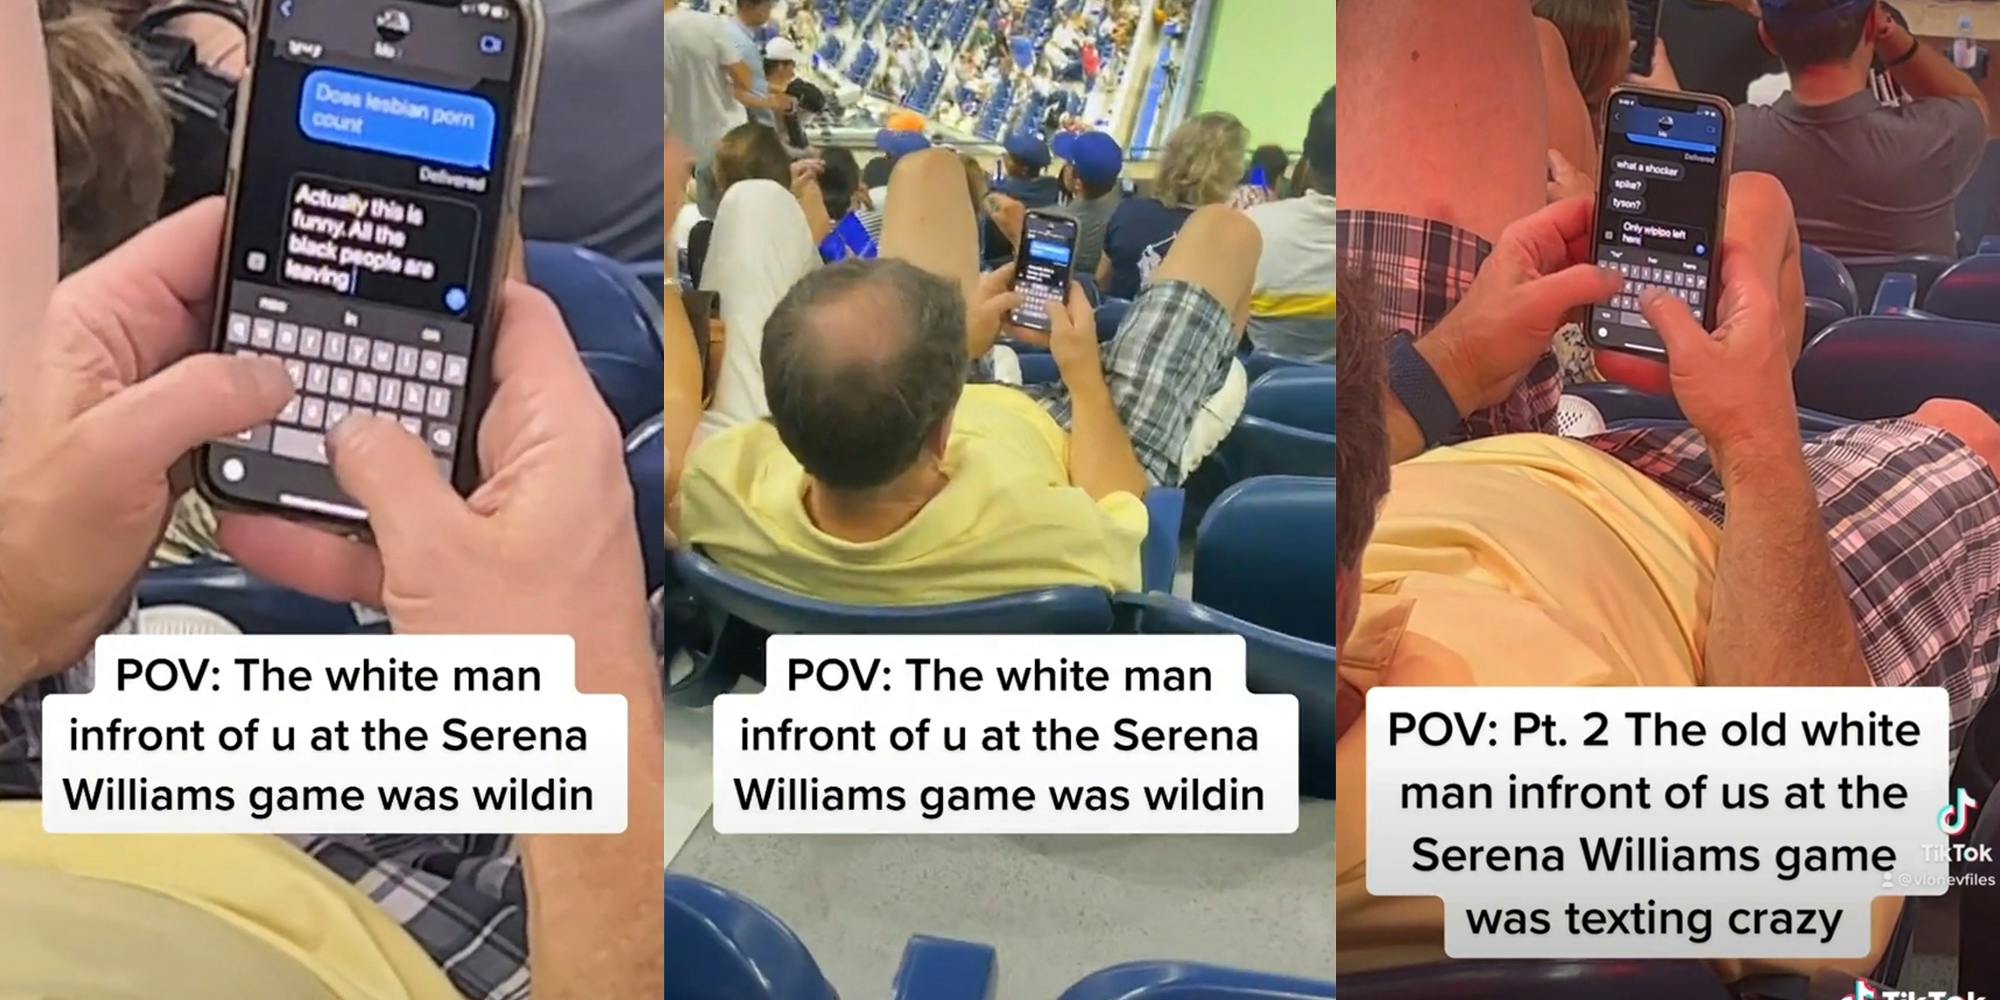 Black And White People Porn Lesbian - White Man Texts Black People Are 'Leaving' Serena Williams Match